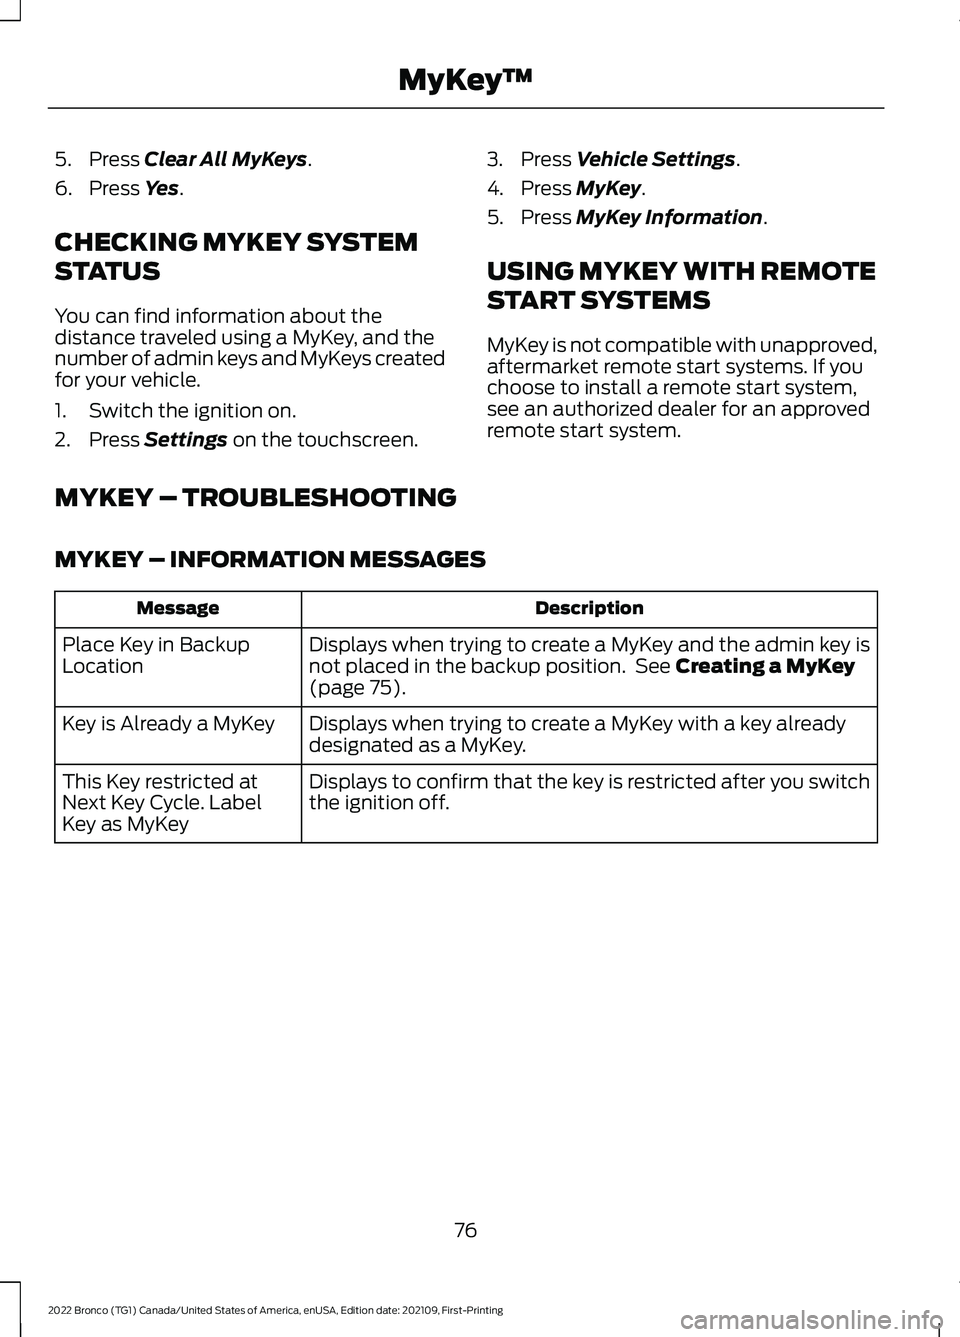 FORD BRONCO 2022  Owners Manual 5.Press Clear All MyKeys.
6.Press Yes.
CHECKING MYKEY SYSTEM
STATUS
You can find information about thedistance traveled using a MyKey, and thenumber of admin keys and MyKeys createdfor your vehicle.
1